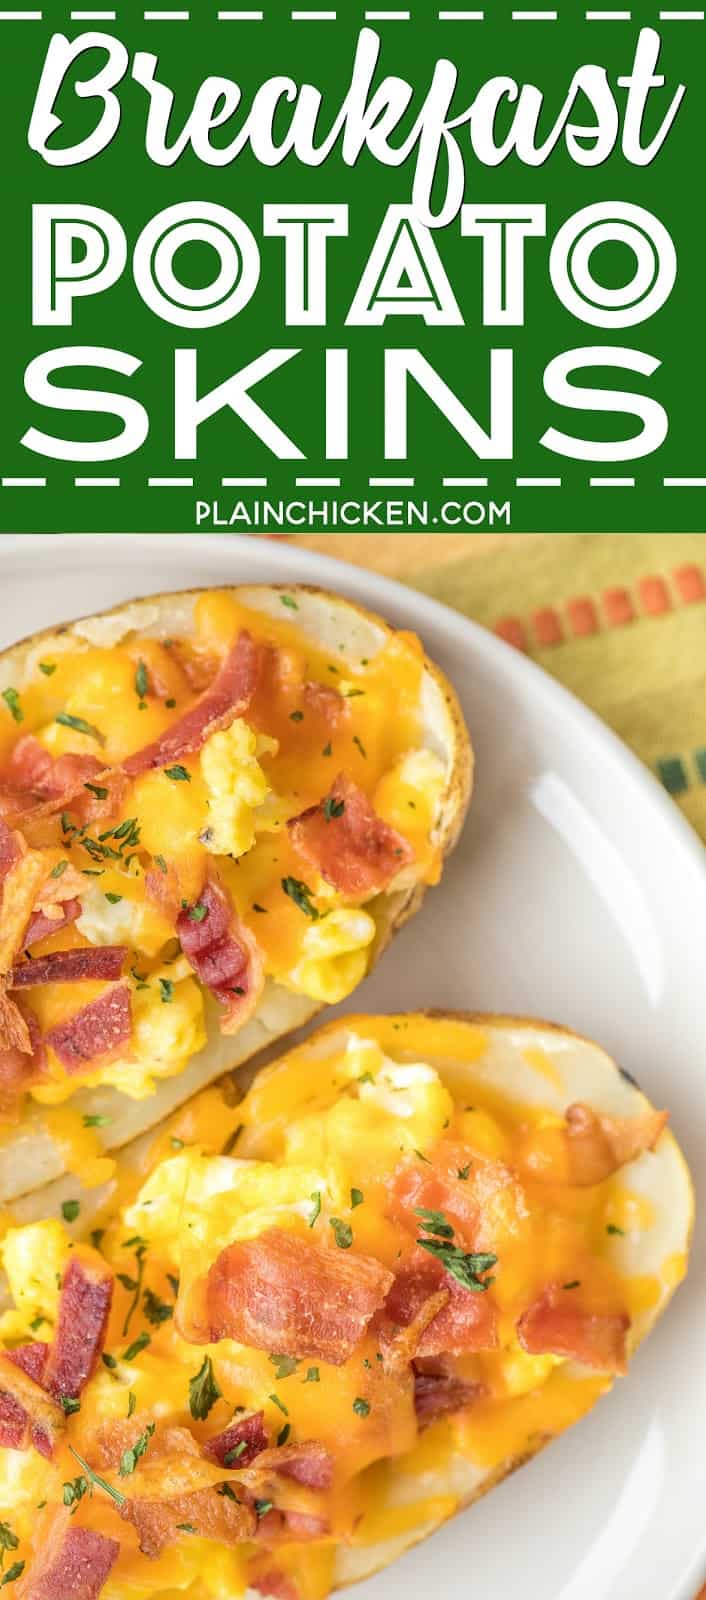 Breakfast Potato Skins - potato skins loaded with eggs, bacon and cheddar cheese. Can make the potatoes ahead of time and finish off in the morning for a quick breakfast. Everyone LOVES these! Can customize with your favorite toppings - sour cream, salsa, green onions. The possibilities are endless!